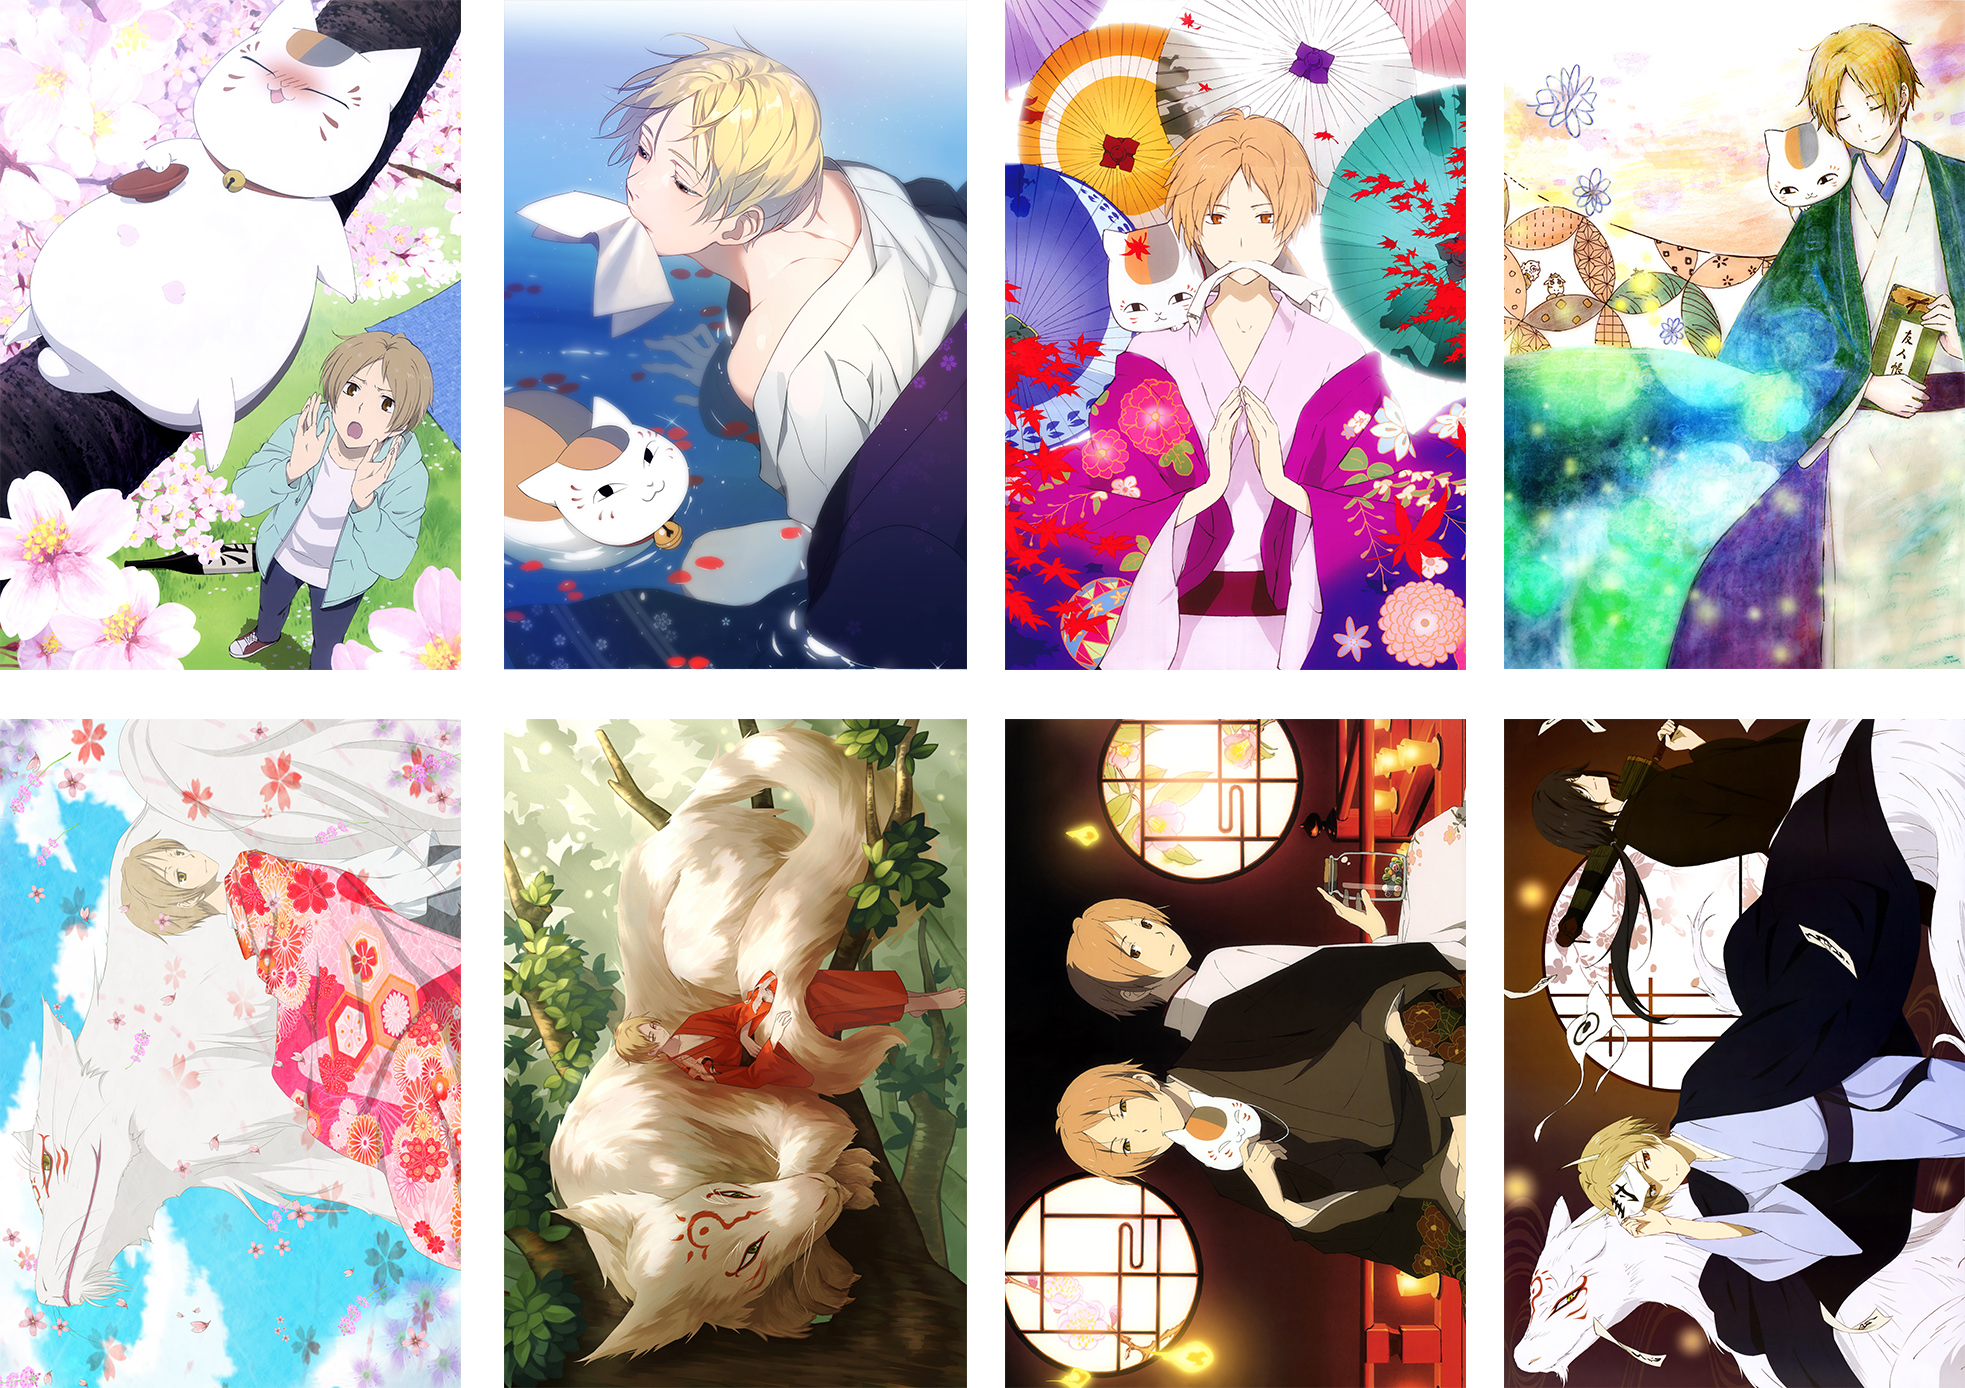 Atsume Yuujinchou anime  posters price for a set of 8 pcs